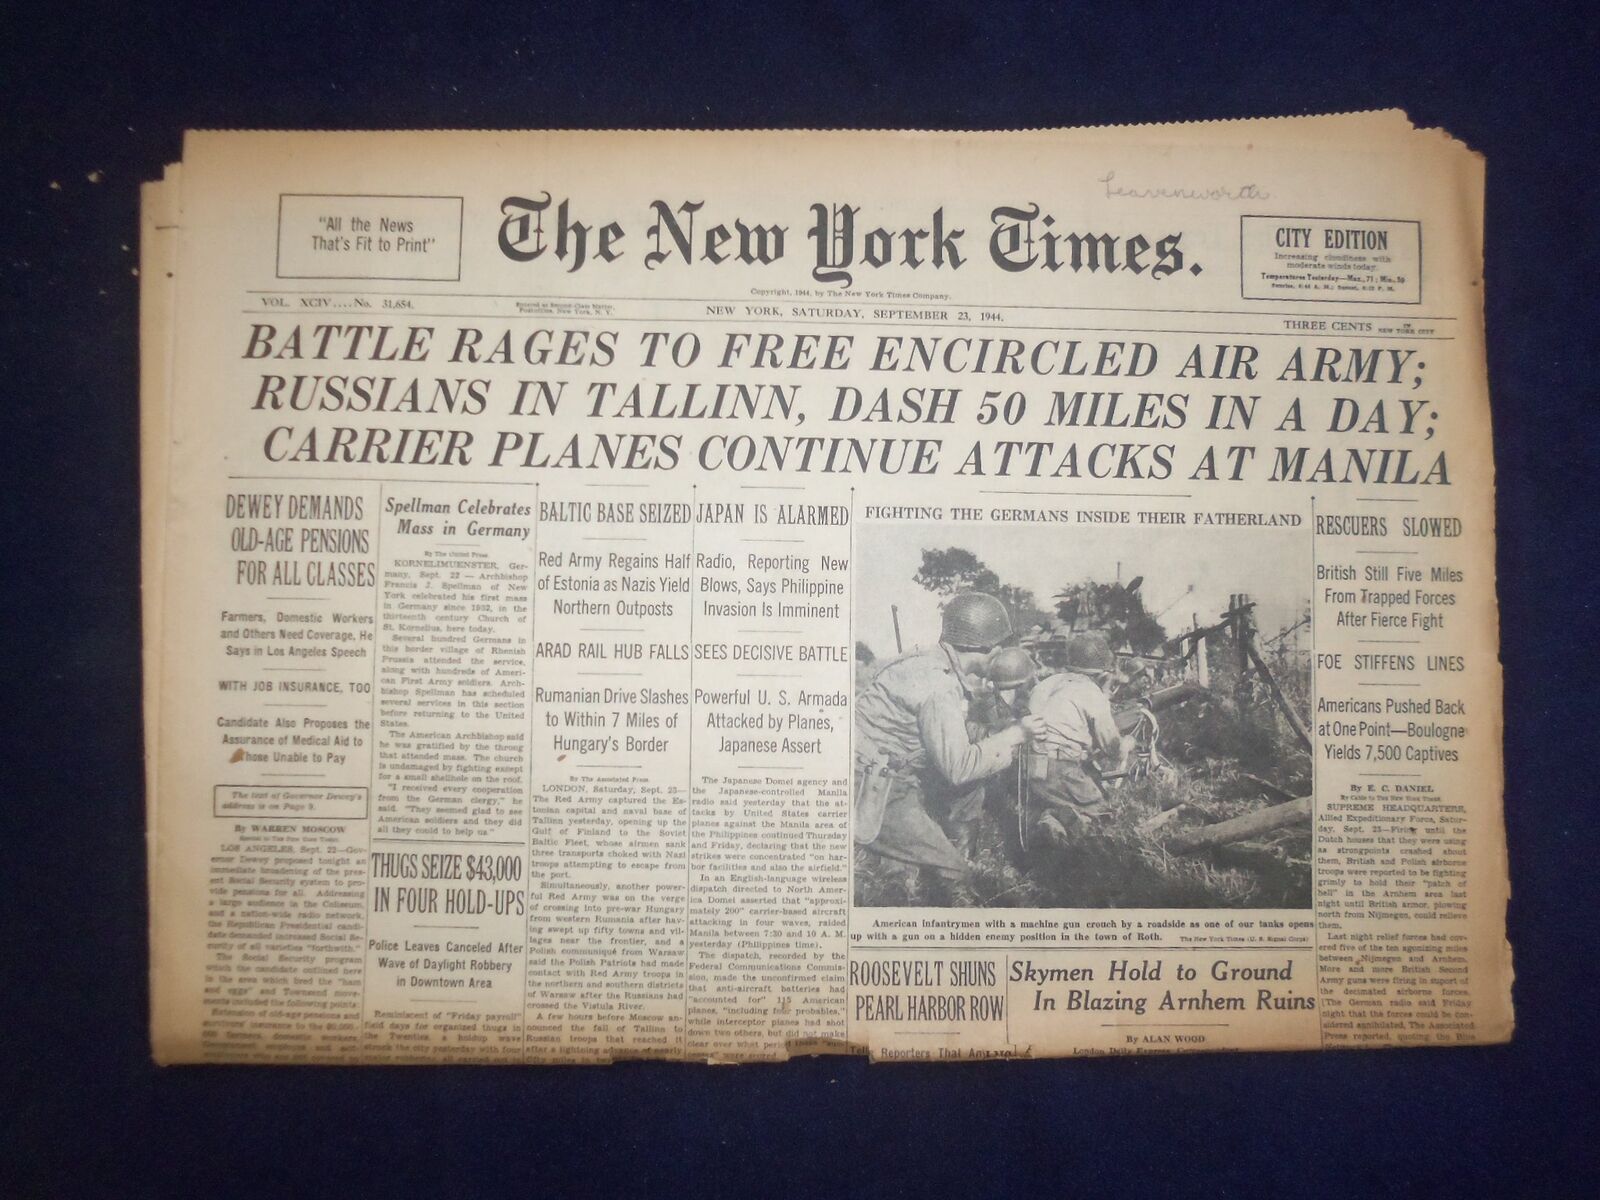 1944 SEP 23 NEW YORK TIMES - BATTLE RAGES TO FREE ENCIRCLED AIR ARMY - NP 6630